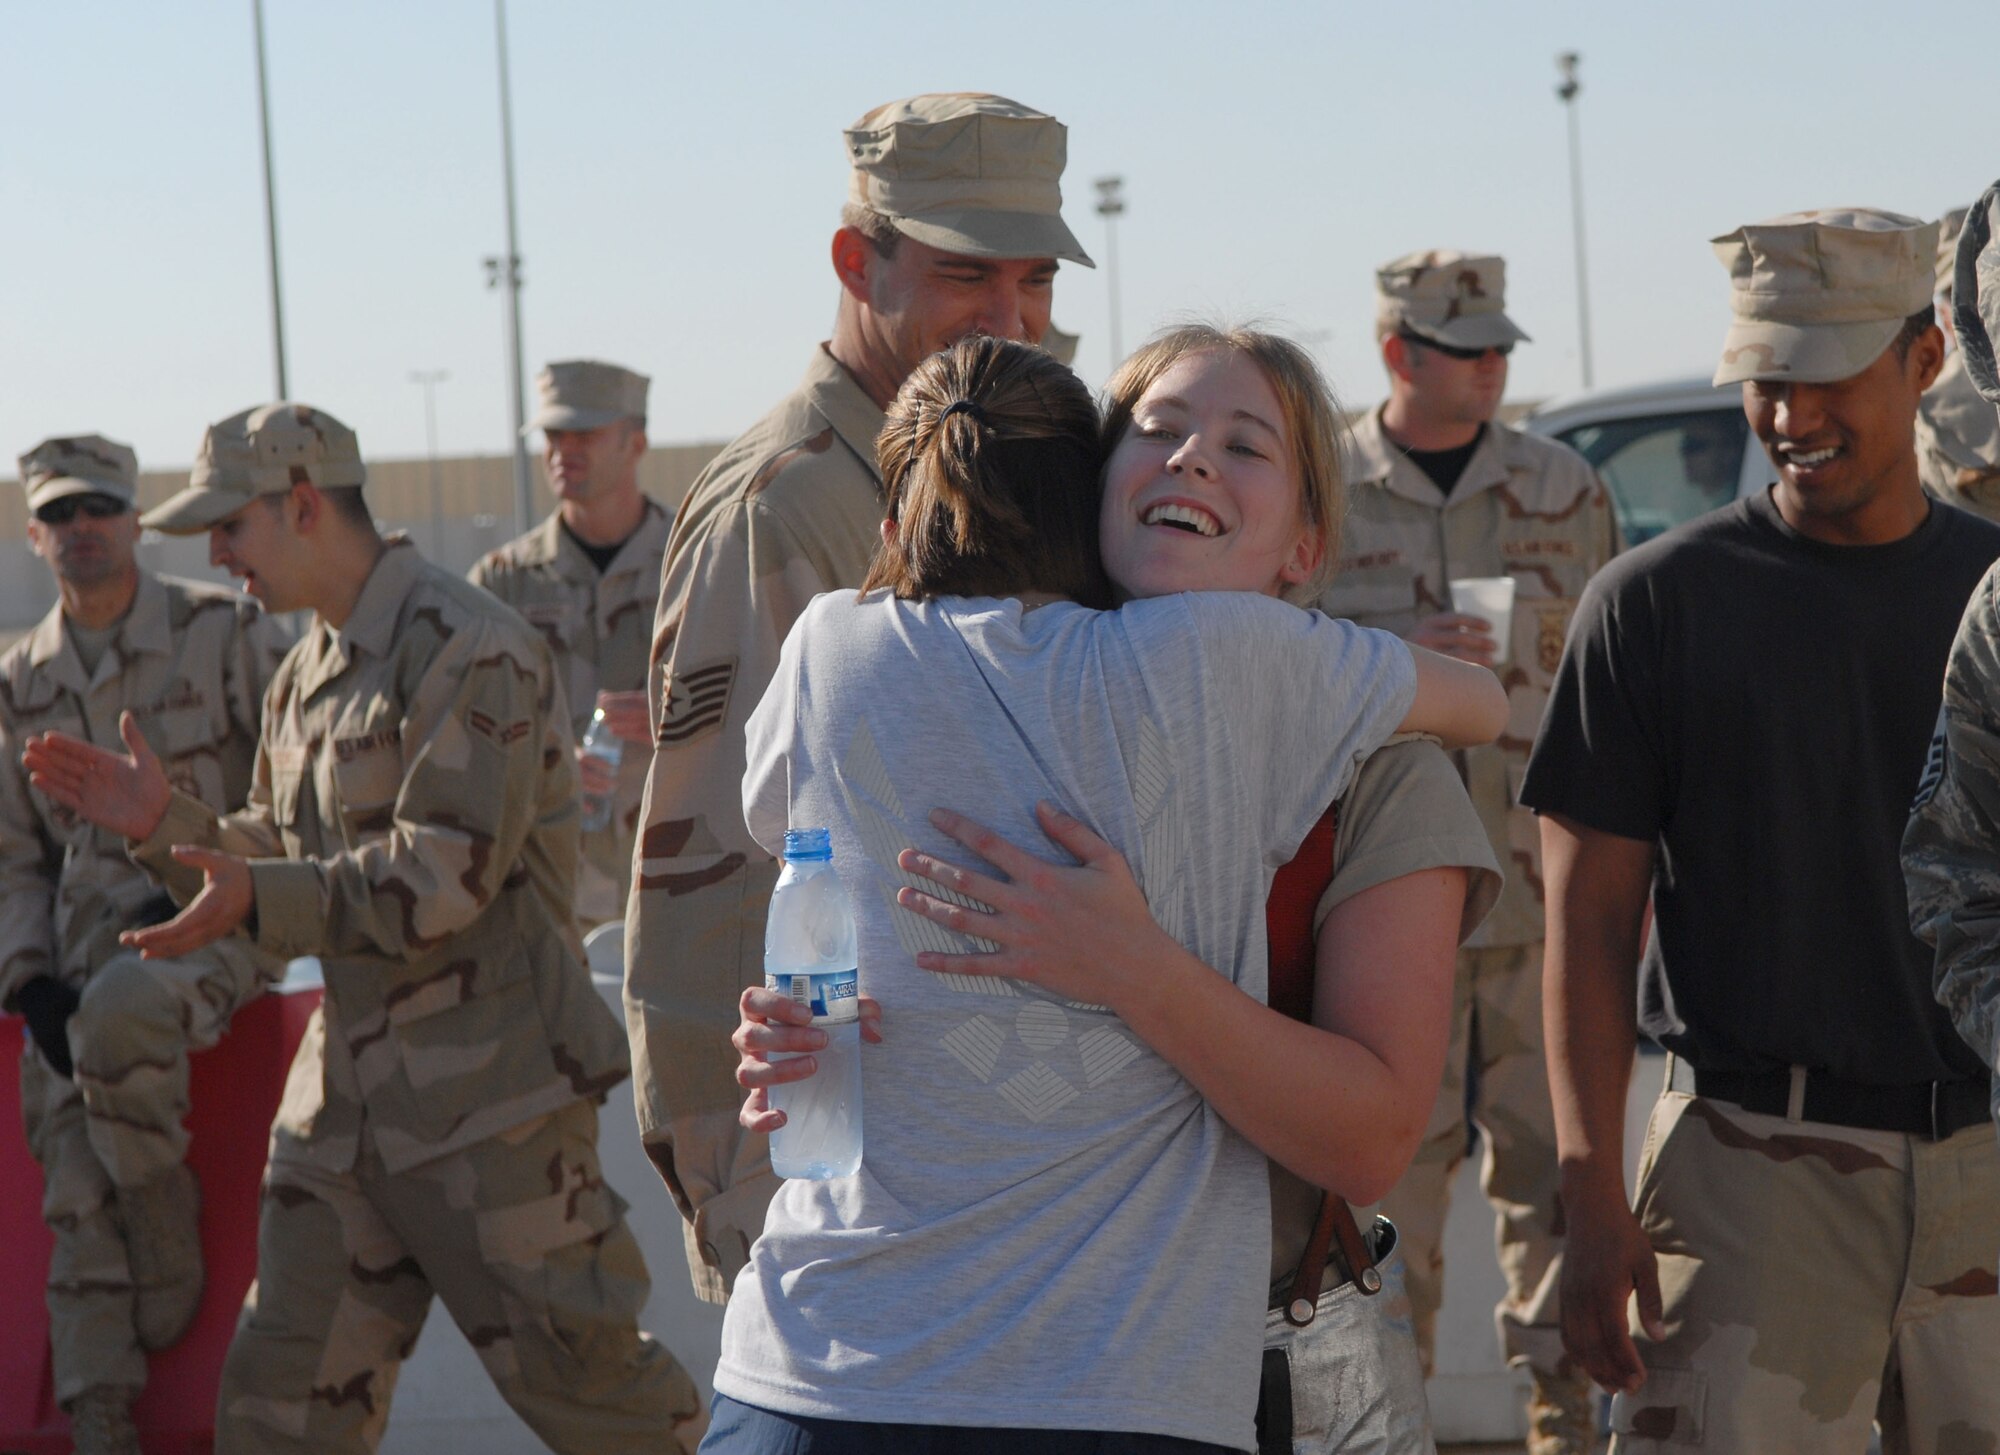 SOUTHWEST ASIA -- Airman 1st class Amanda Boehne, 380th Expeditionary Force Support Squadron, gets a congratulatory hug after completing the Firefighter Challenge here Dec. 20. The 380th Expeditionary Civil Engineer Fire and Emergency Services Flight hosted the event to provide insight on the mental and physical challenges firefighters face in daily training and emergency responses. Airman Boehne, an Air National Guard member who calls Waconia, Minn., home, is deployed from the 133rd Airlift Wing in Minneapolis, Minn. (U.S. Air Force photo by Tech. Sgt. Denise Johnson) (released)